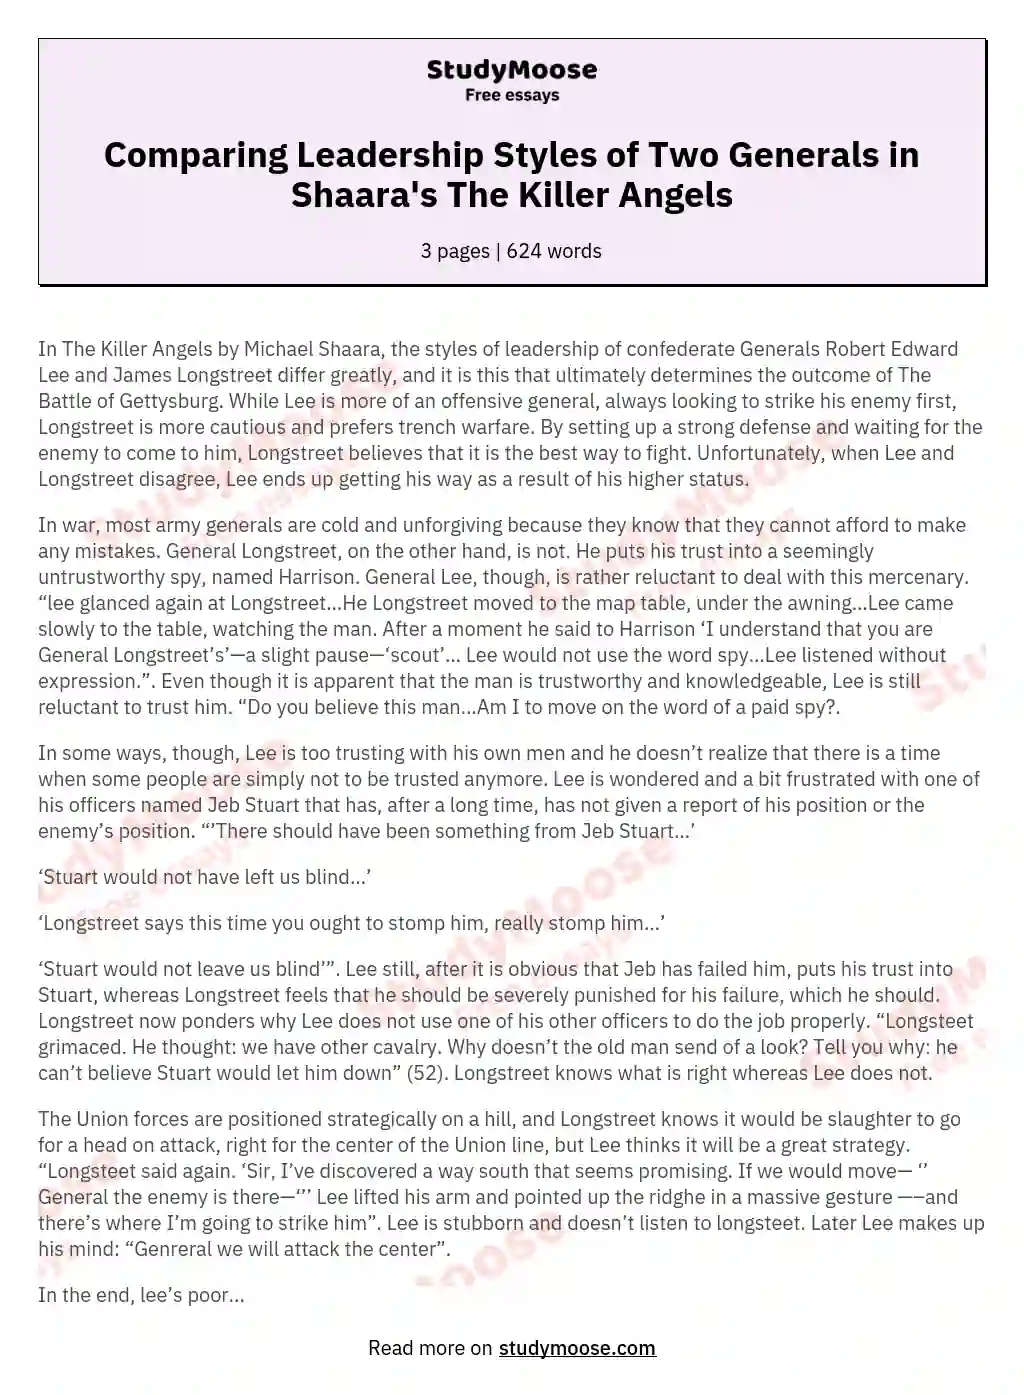 Comparing Leadership Styles of Two Generals in Shaara's The Killer Angels